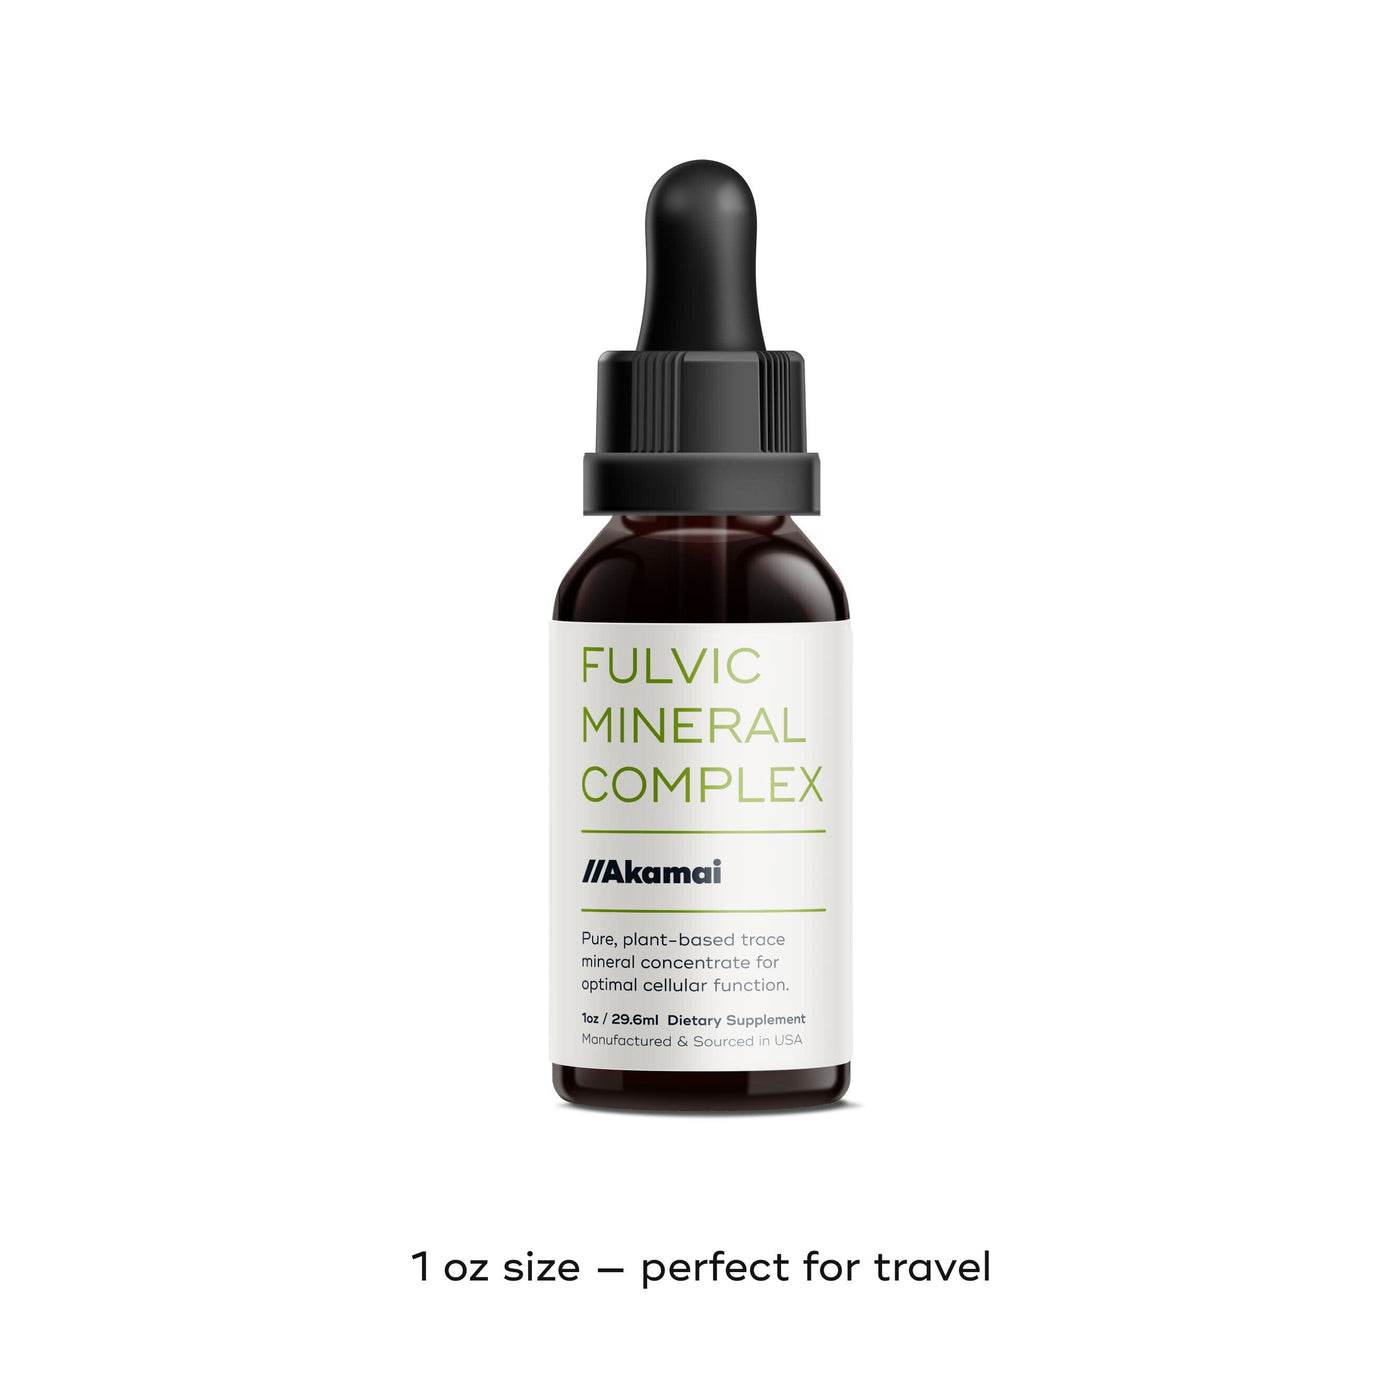 FULVIC MINERAL COMPLEX Supplement 1 ounce bottle perfect for travel.